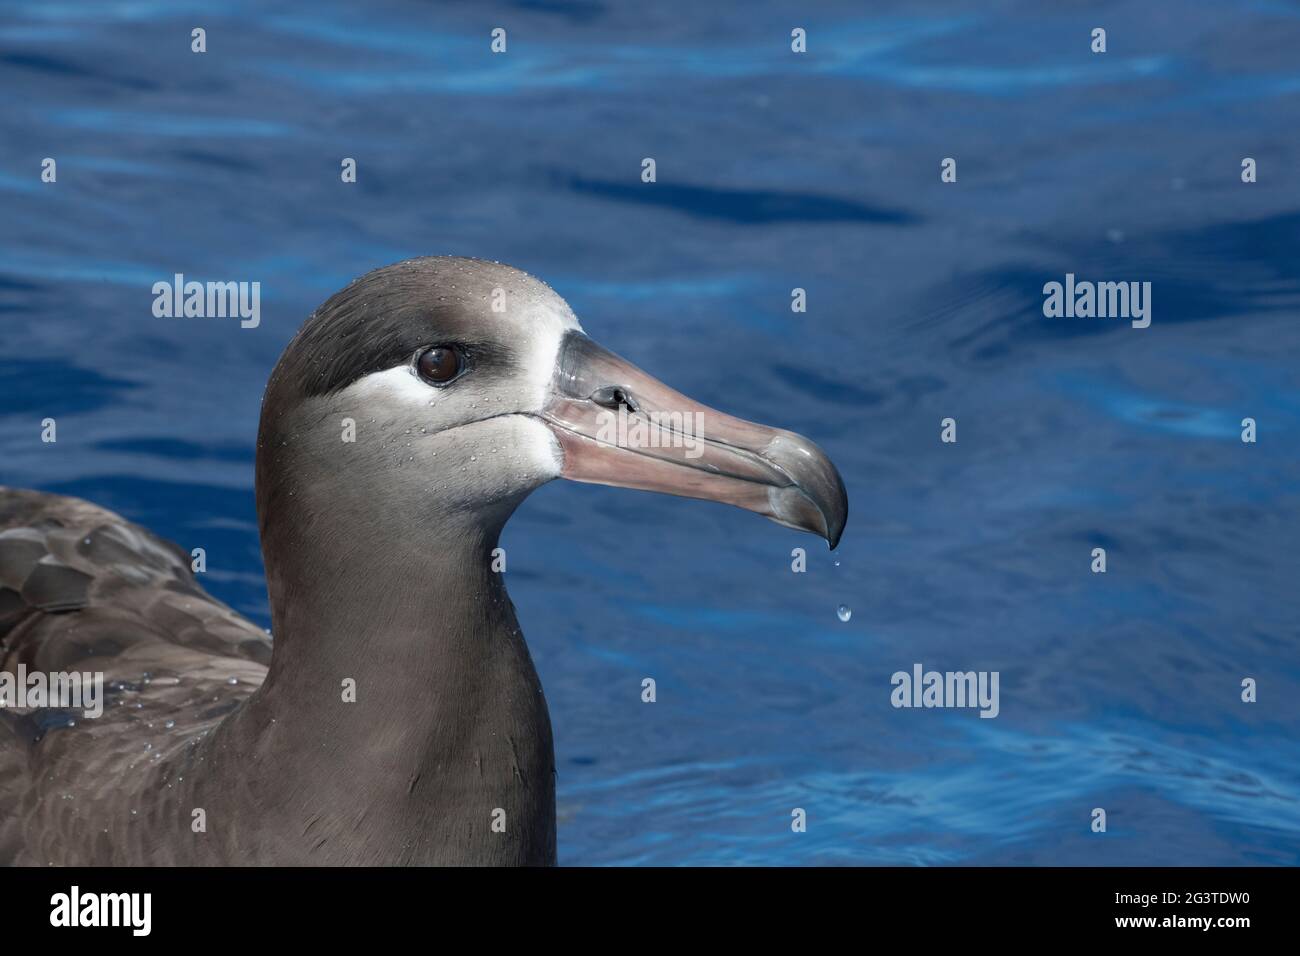 black-footed albatross, Phoebastria nigripes, with water dripping off bill and beading on feathers after dipping head in ocean off South Kona, Hawaii Stock Photo